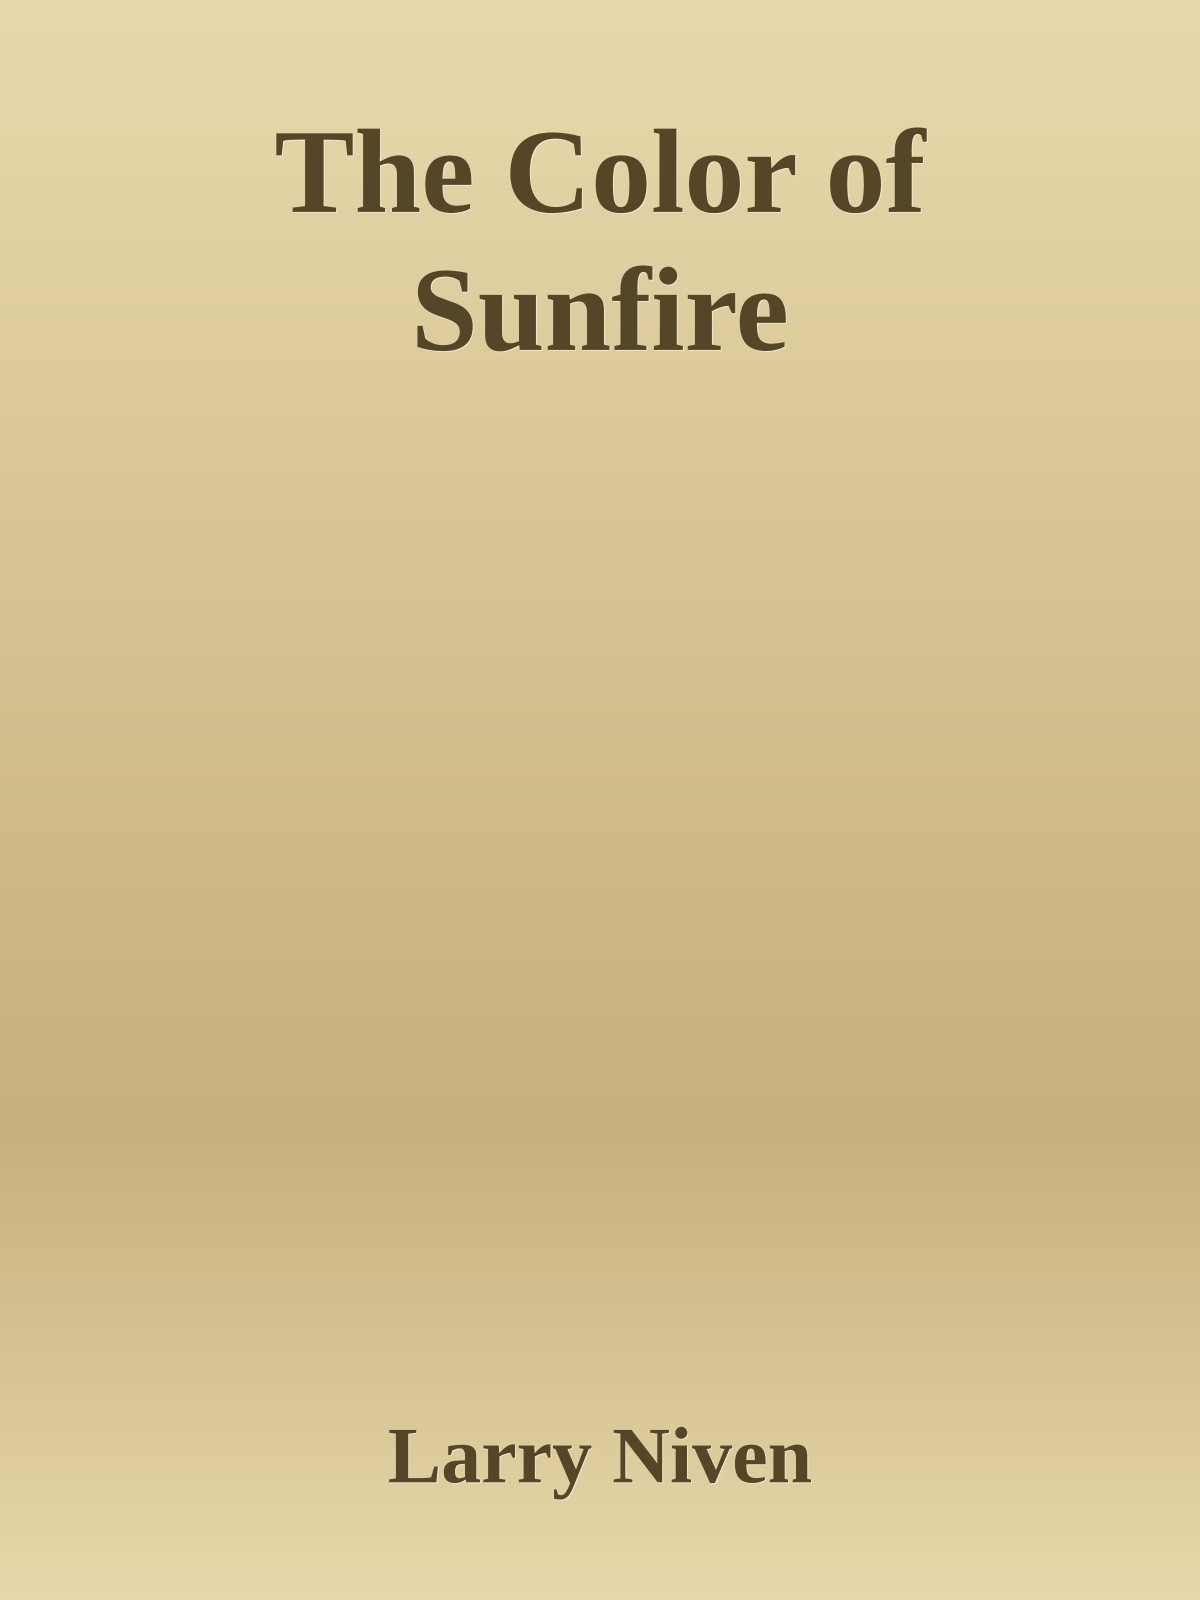 The Color of Sunfire